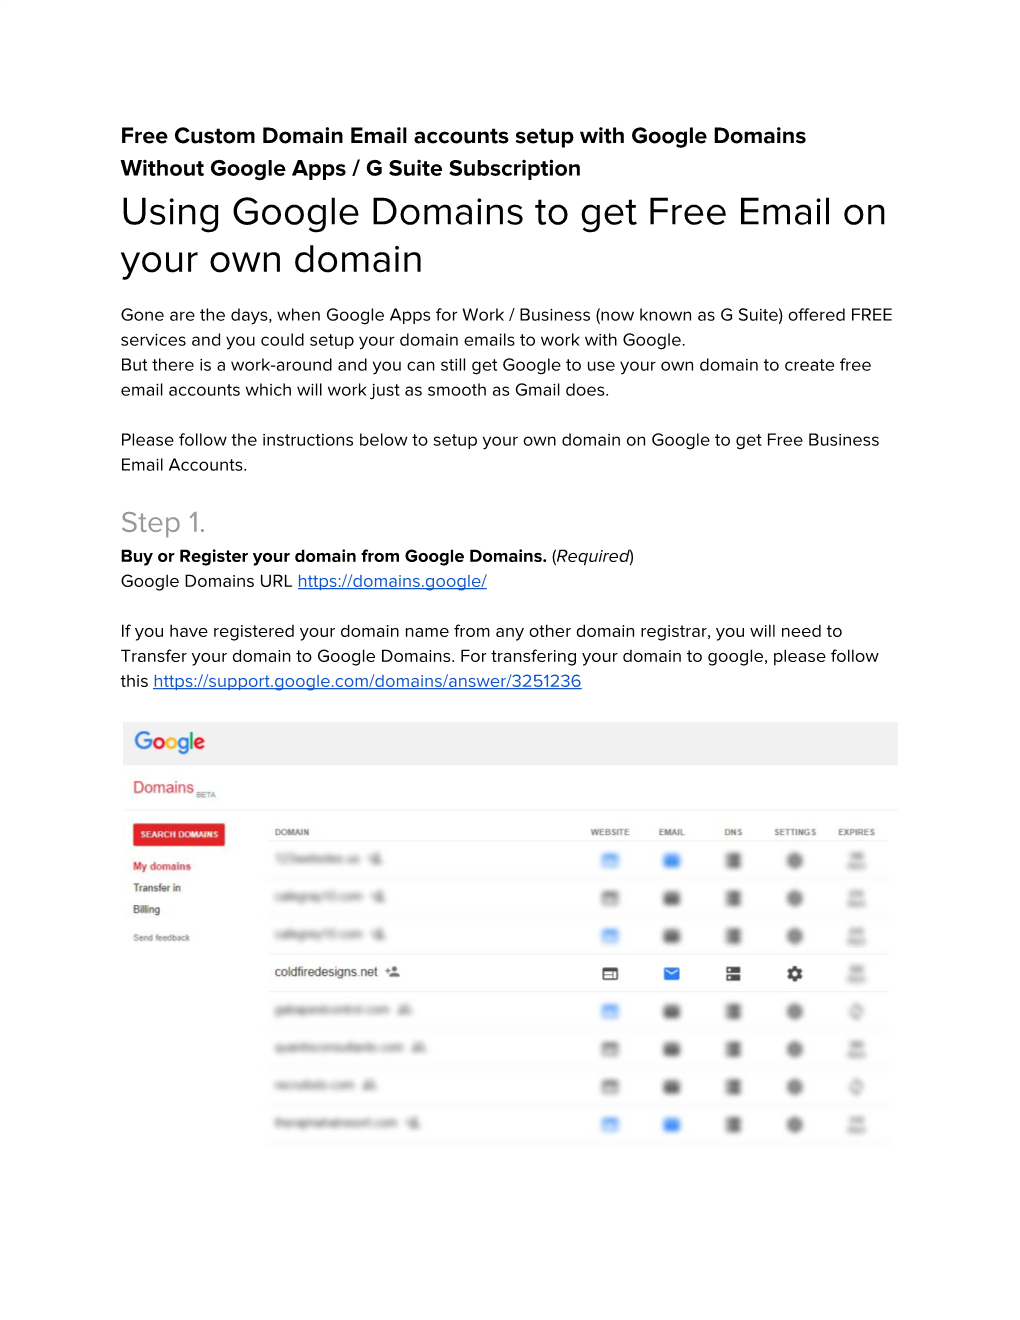 Using Google Domains to Get Free Email on Your Own Domain